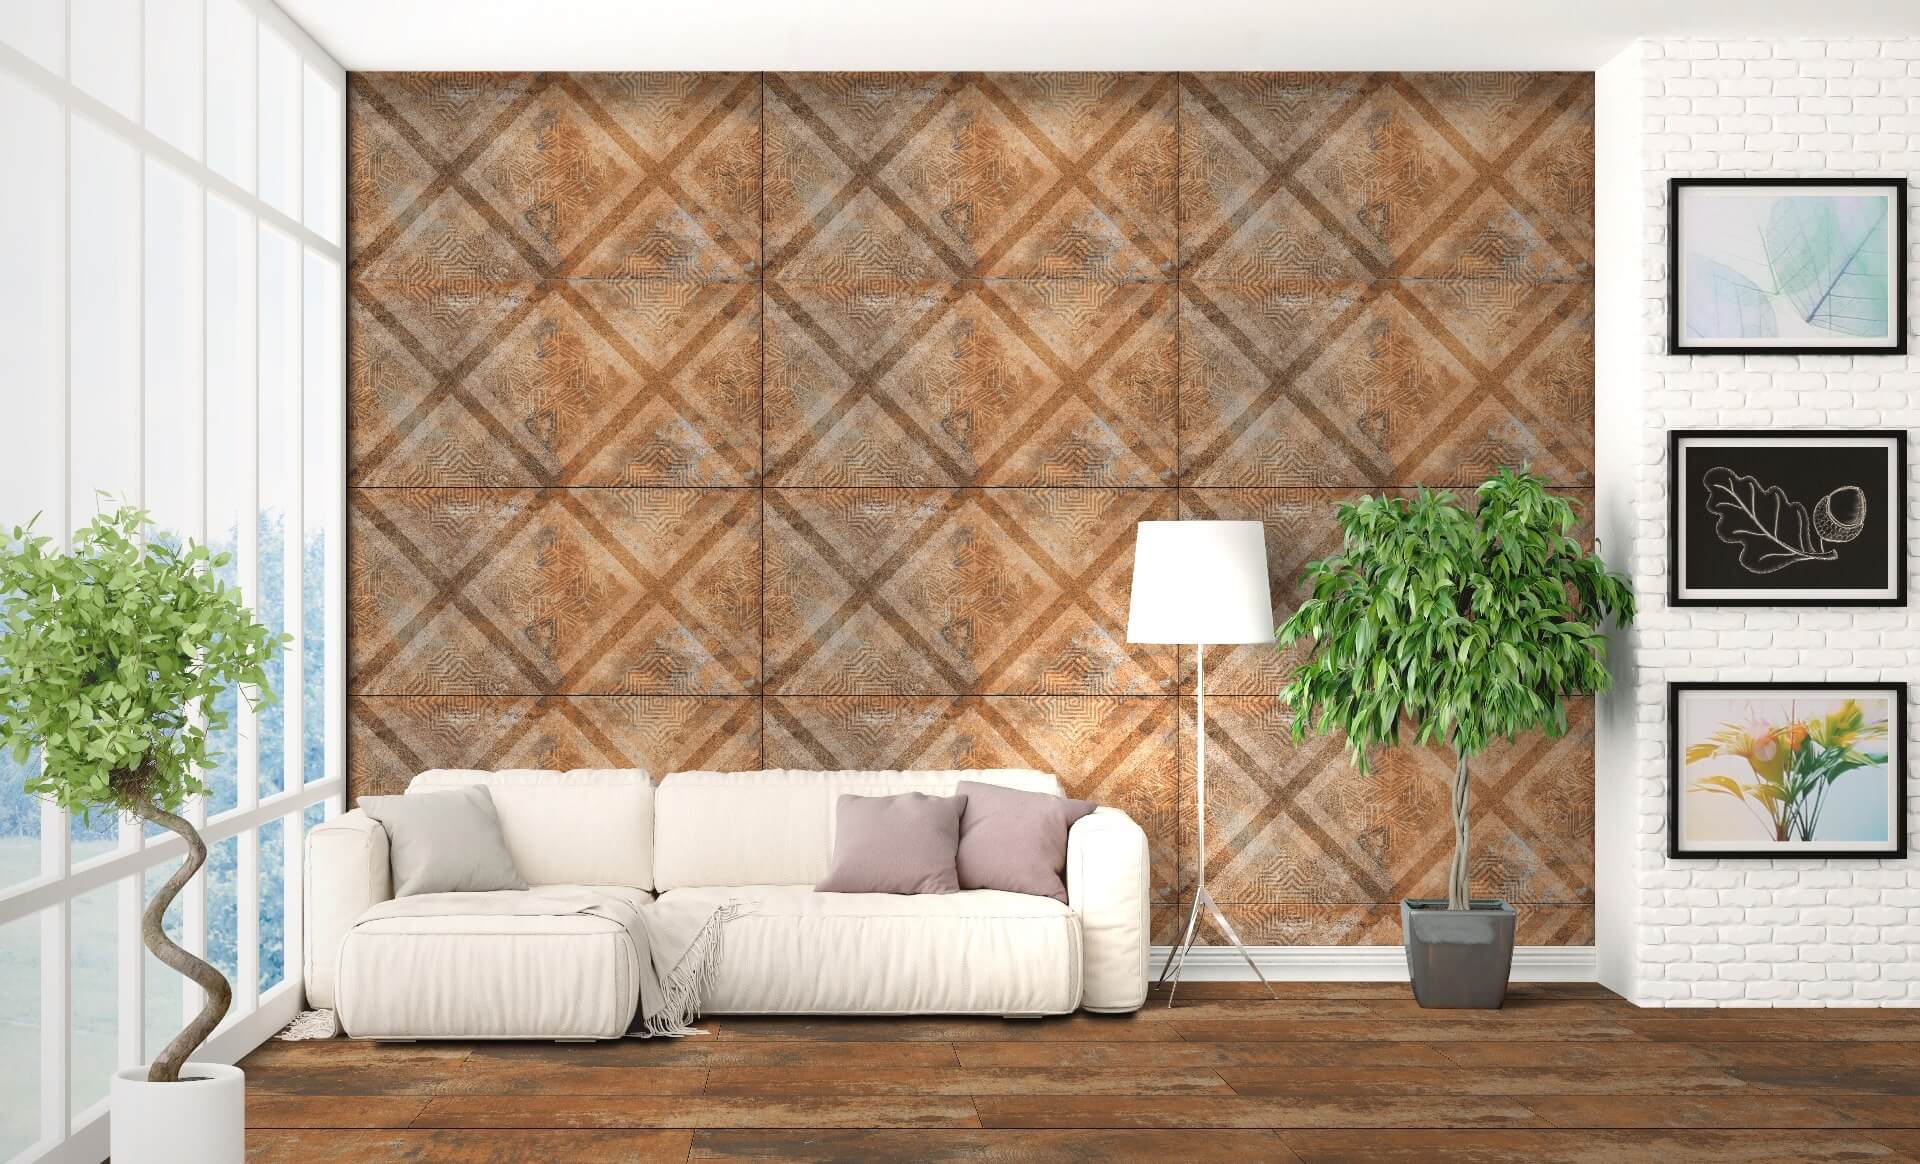 Outdoor Tiles for Accent Tiles